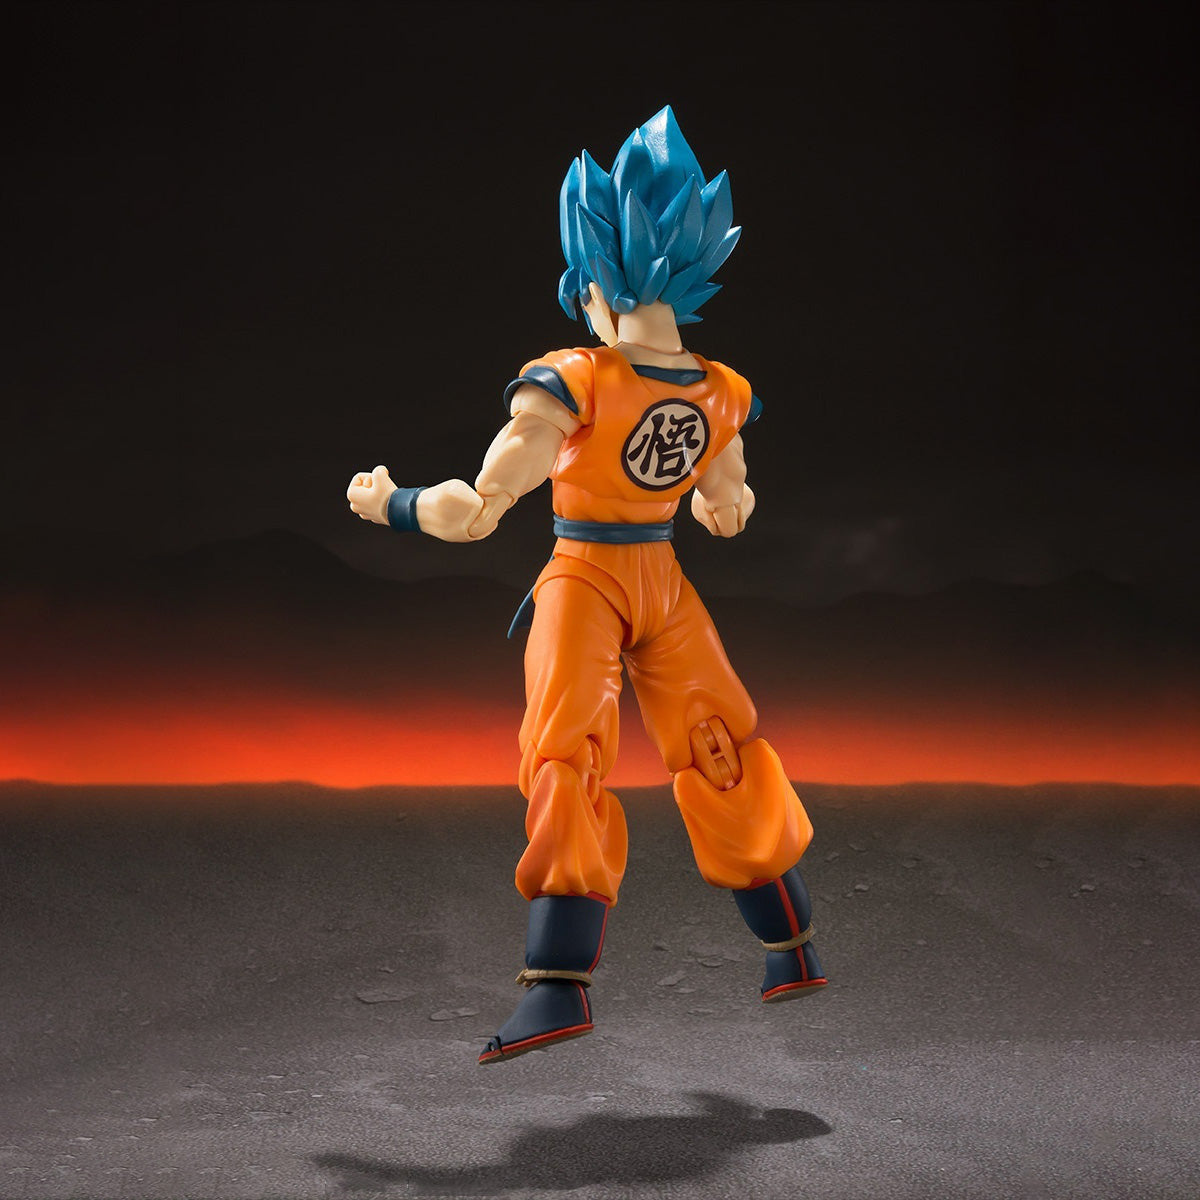 Bandai - S.H.Figuarts - Dragon Ball Super: Broly - Super Saiyan God Super Saiyan Son Goku -Super- (Reissue) (1/12 Scale) - Marvelous Toys